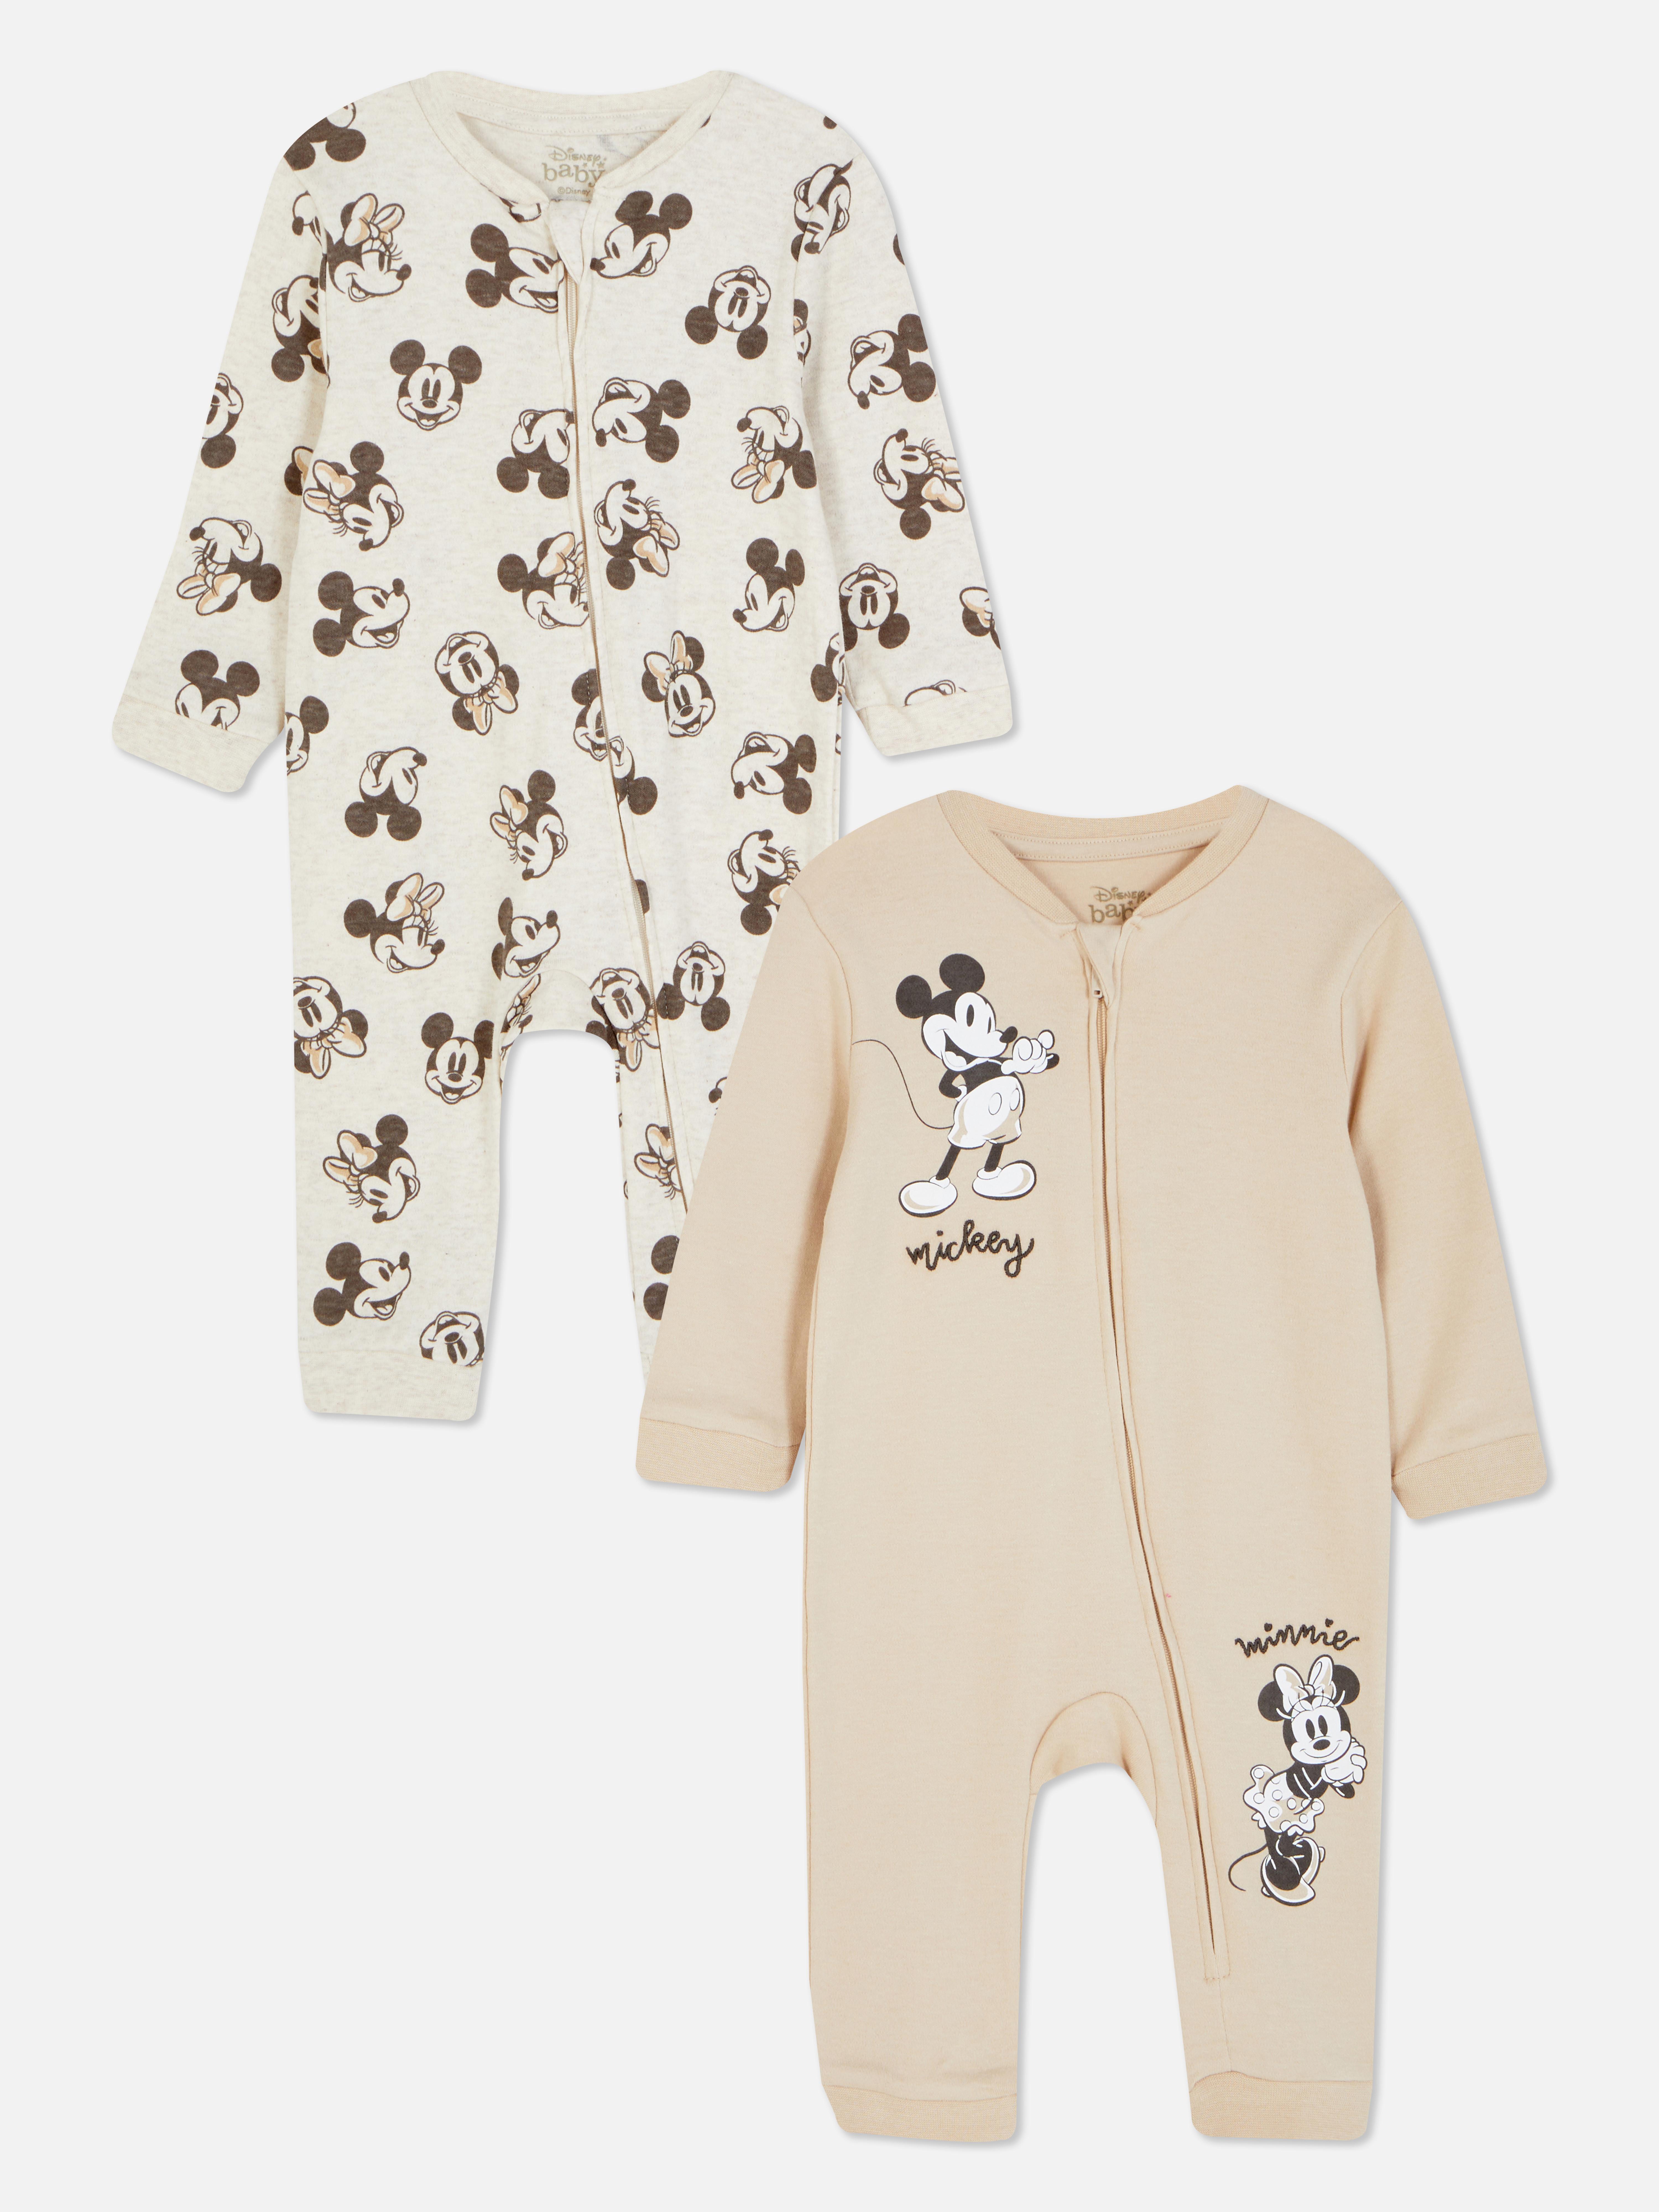 2pk Disney’s Mickey Mouse and Minnie Mouse Sleepsuits